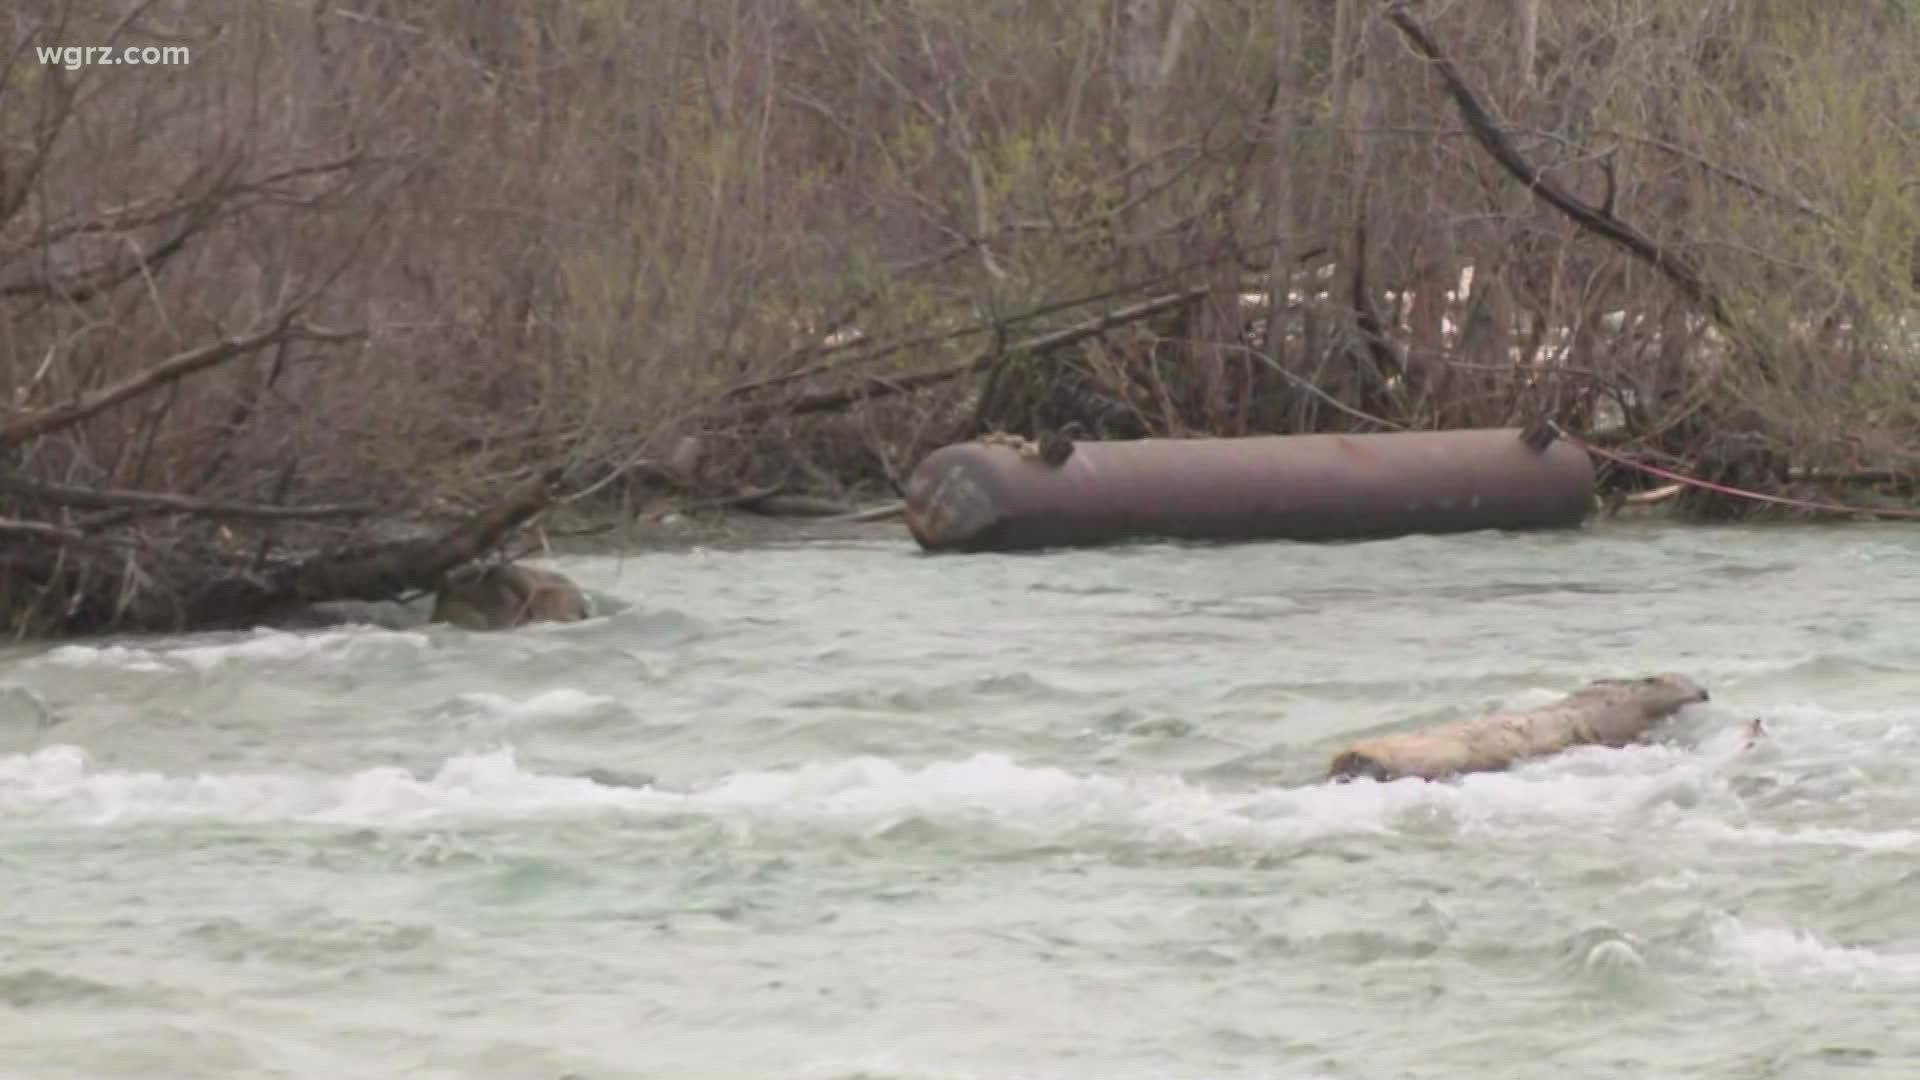 Part of stuck ice boom to be removed from Niagara River